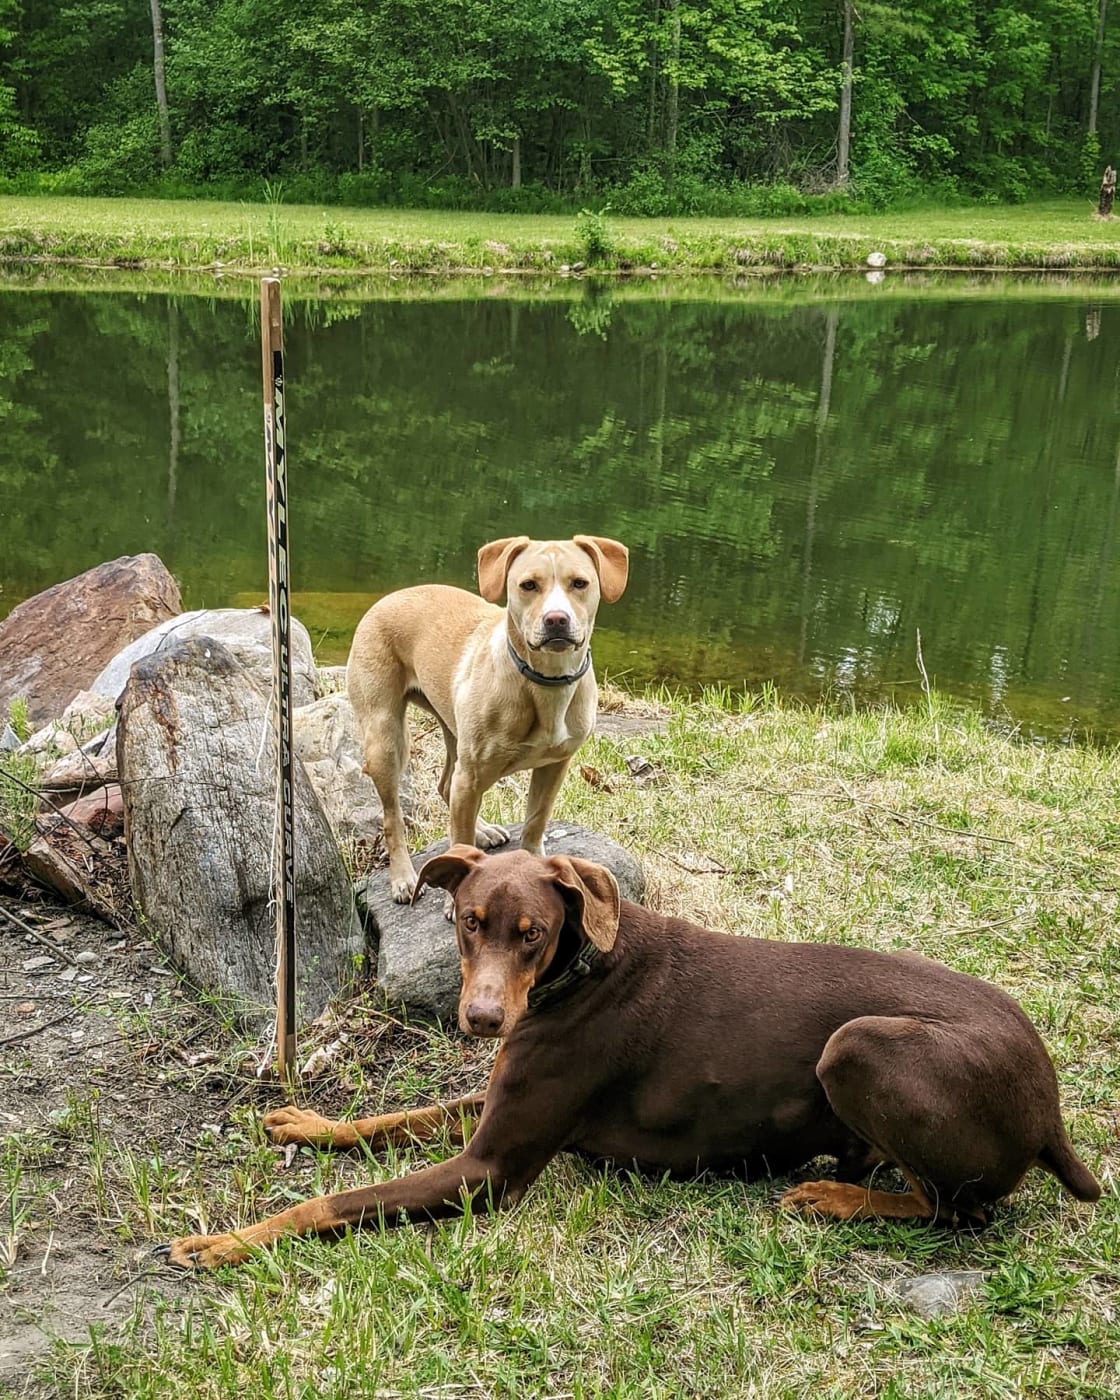 Our dog Cora (tan) with her new best friend, Baron (brown, owners dog).